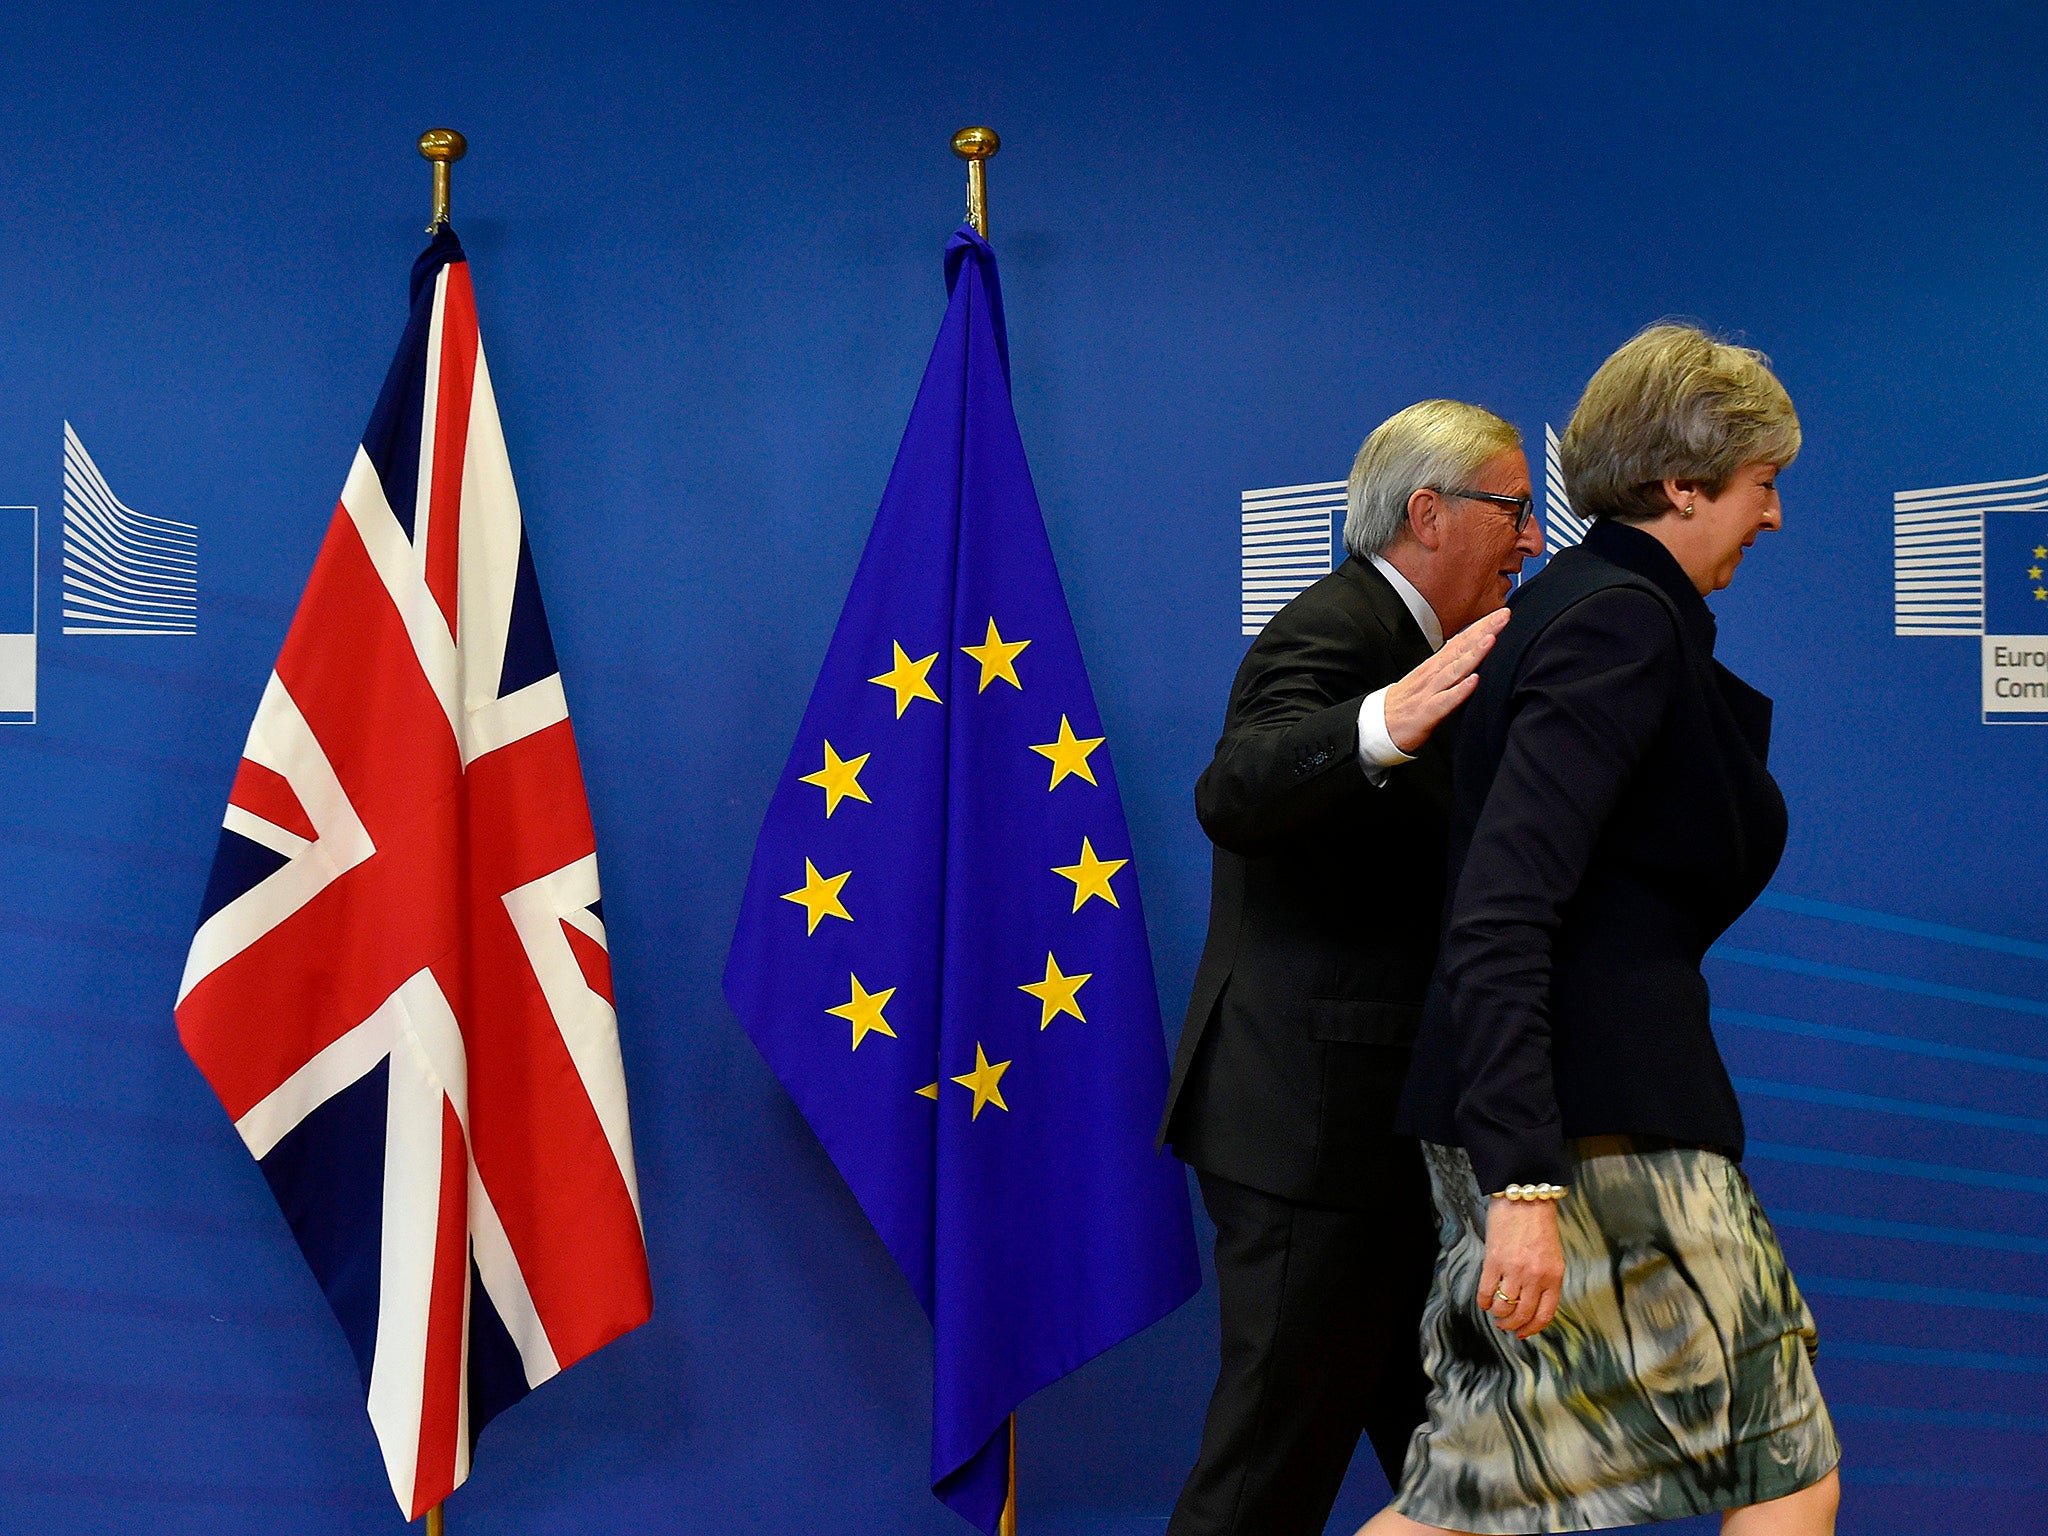 Britain has until March 2019 to agree a deal with the EU27